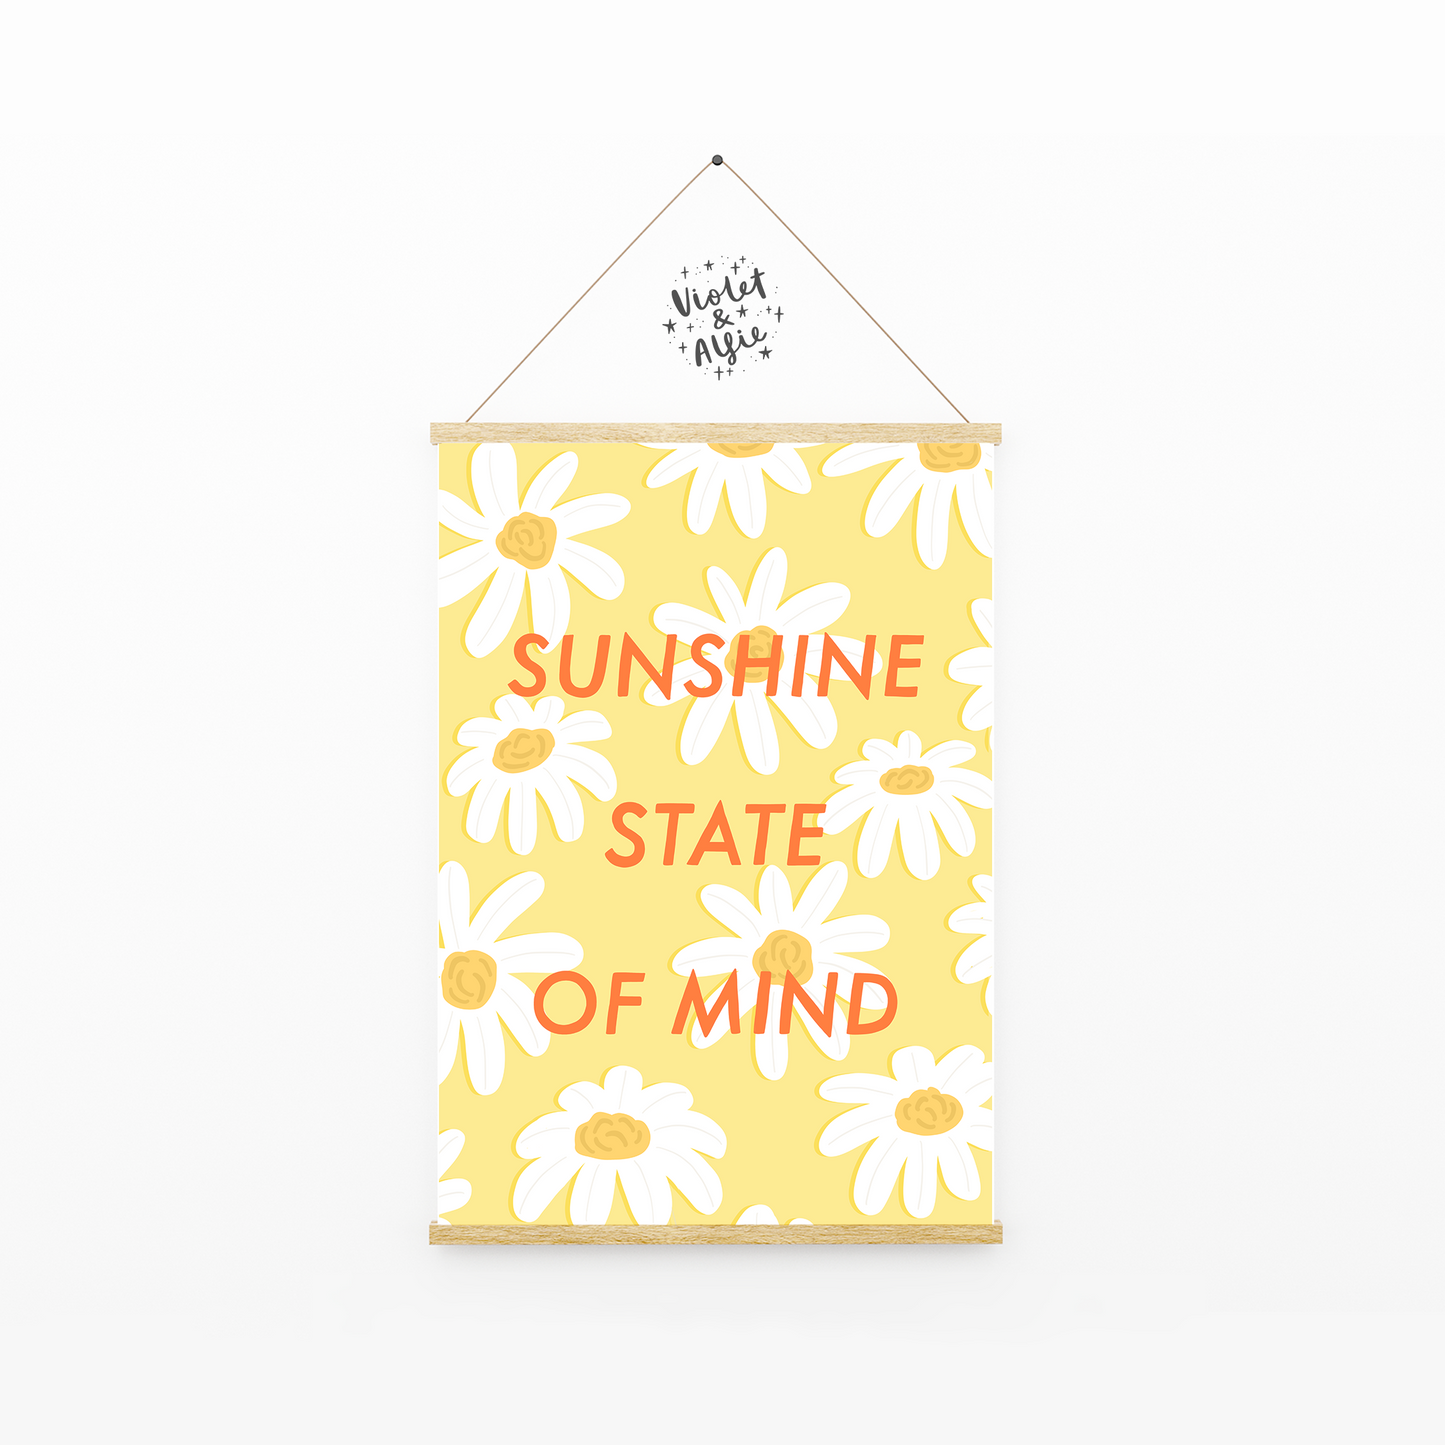 Sunshine state of mind, yellow wall art, cheerful decor, positivity quote, motivational inspirational prints, happy wall art, daisies flower illustration, botanical wall art, flower prints, colourful decor, pastel wall art, Floral daisy print, pretty flower wall art, botanical decor, pastel flower art, daisy decor, pretty prints, flower lover gift